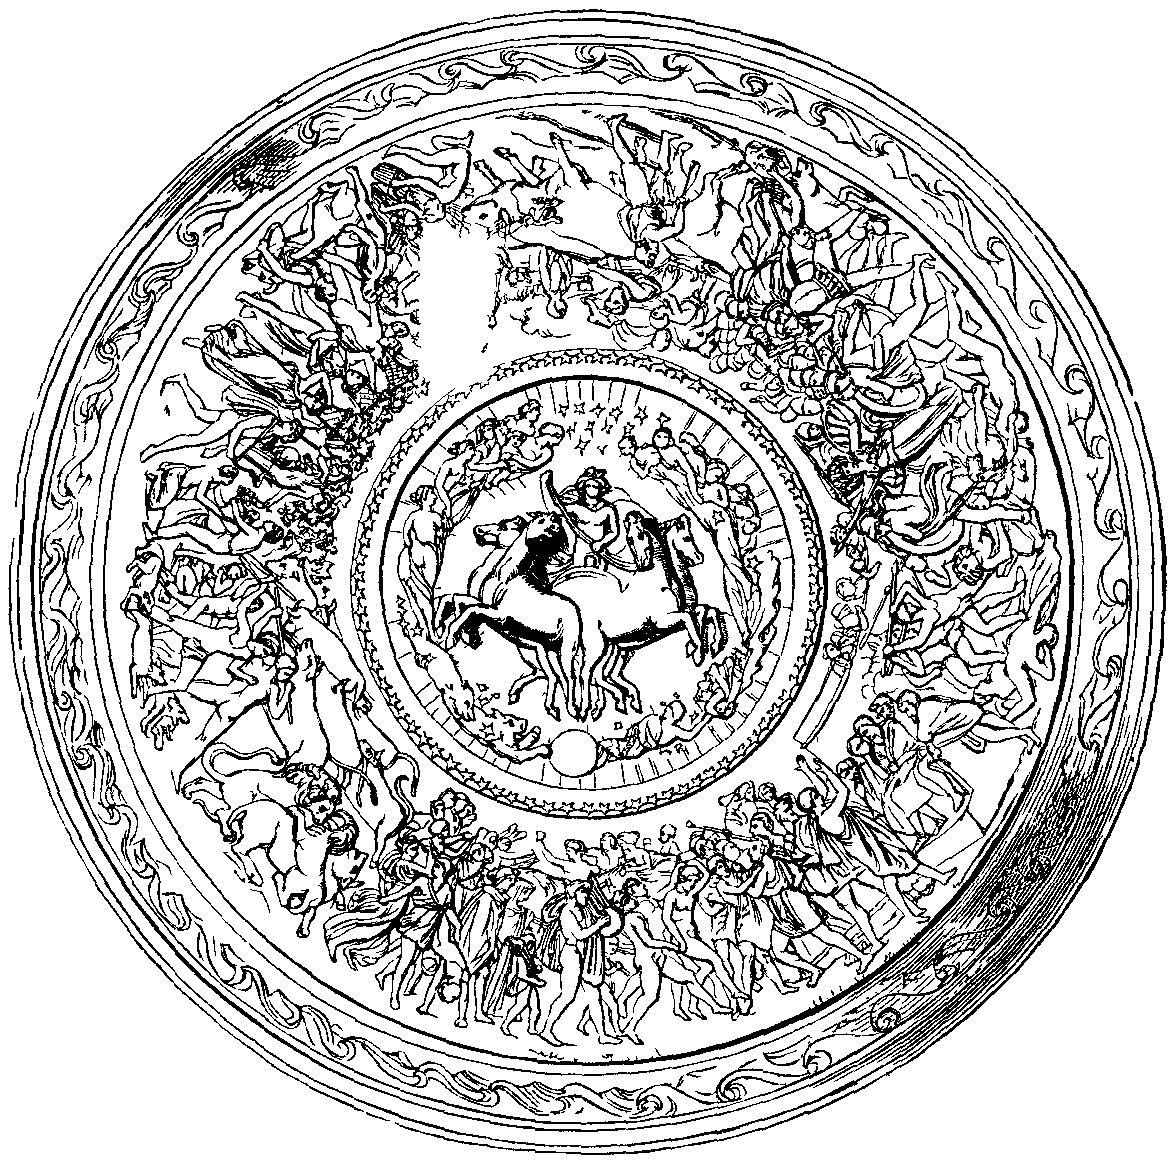 THE SHIELD OF ACHILLES